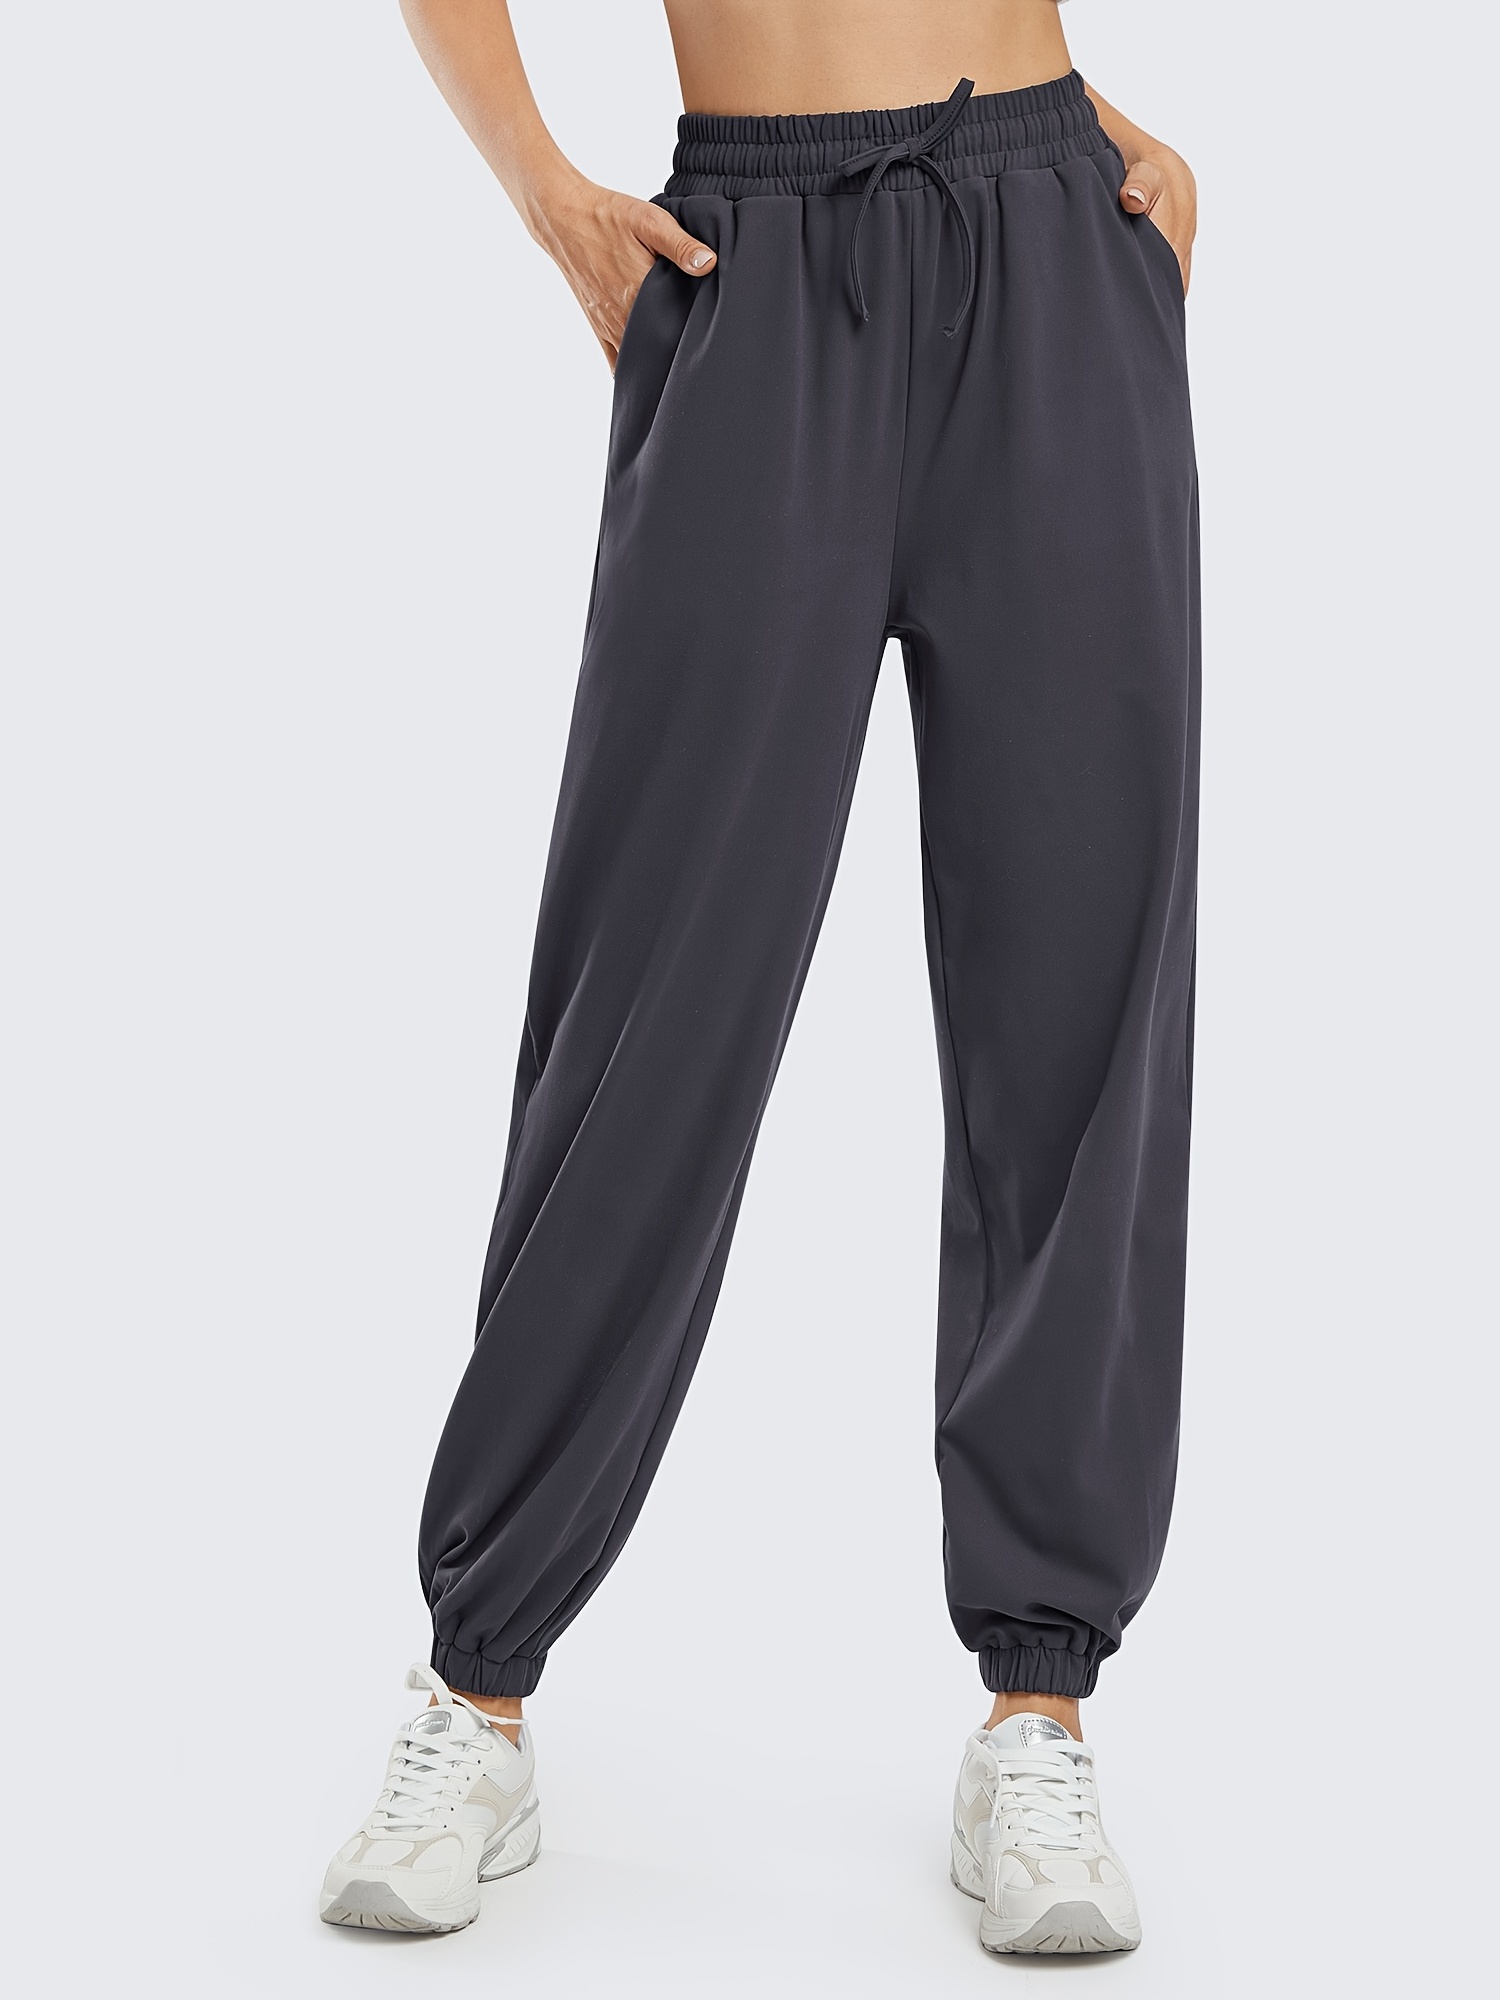 Maeau Women's Casual Sweatpant Sport Jogging Cuffed Trousers High Waist  Loose Pants Cotton Cinch Bottom Pant Thick/Thin : : Clothing,  Shoes 